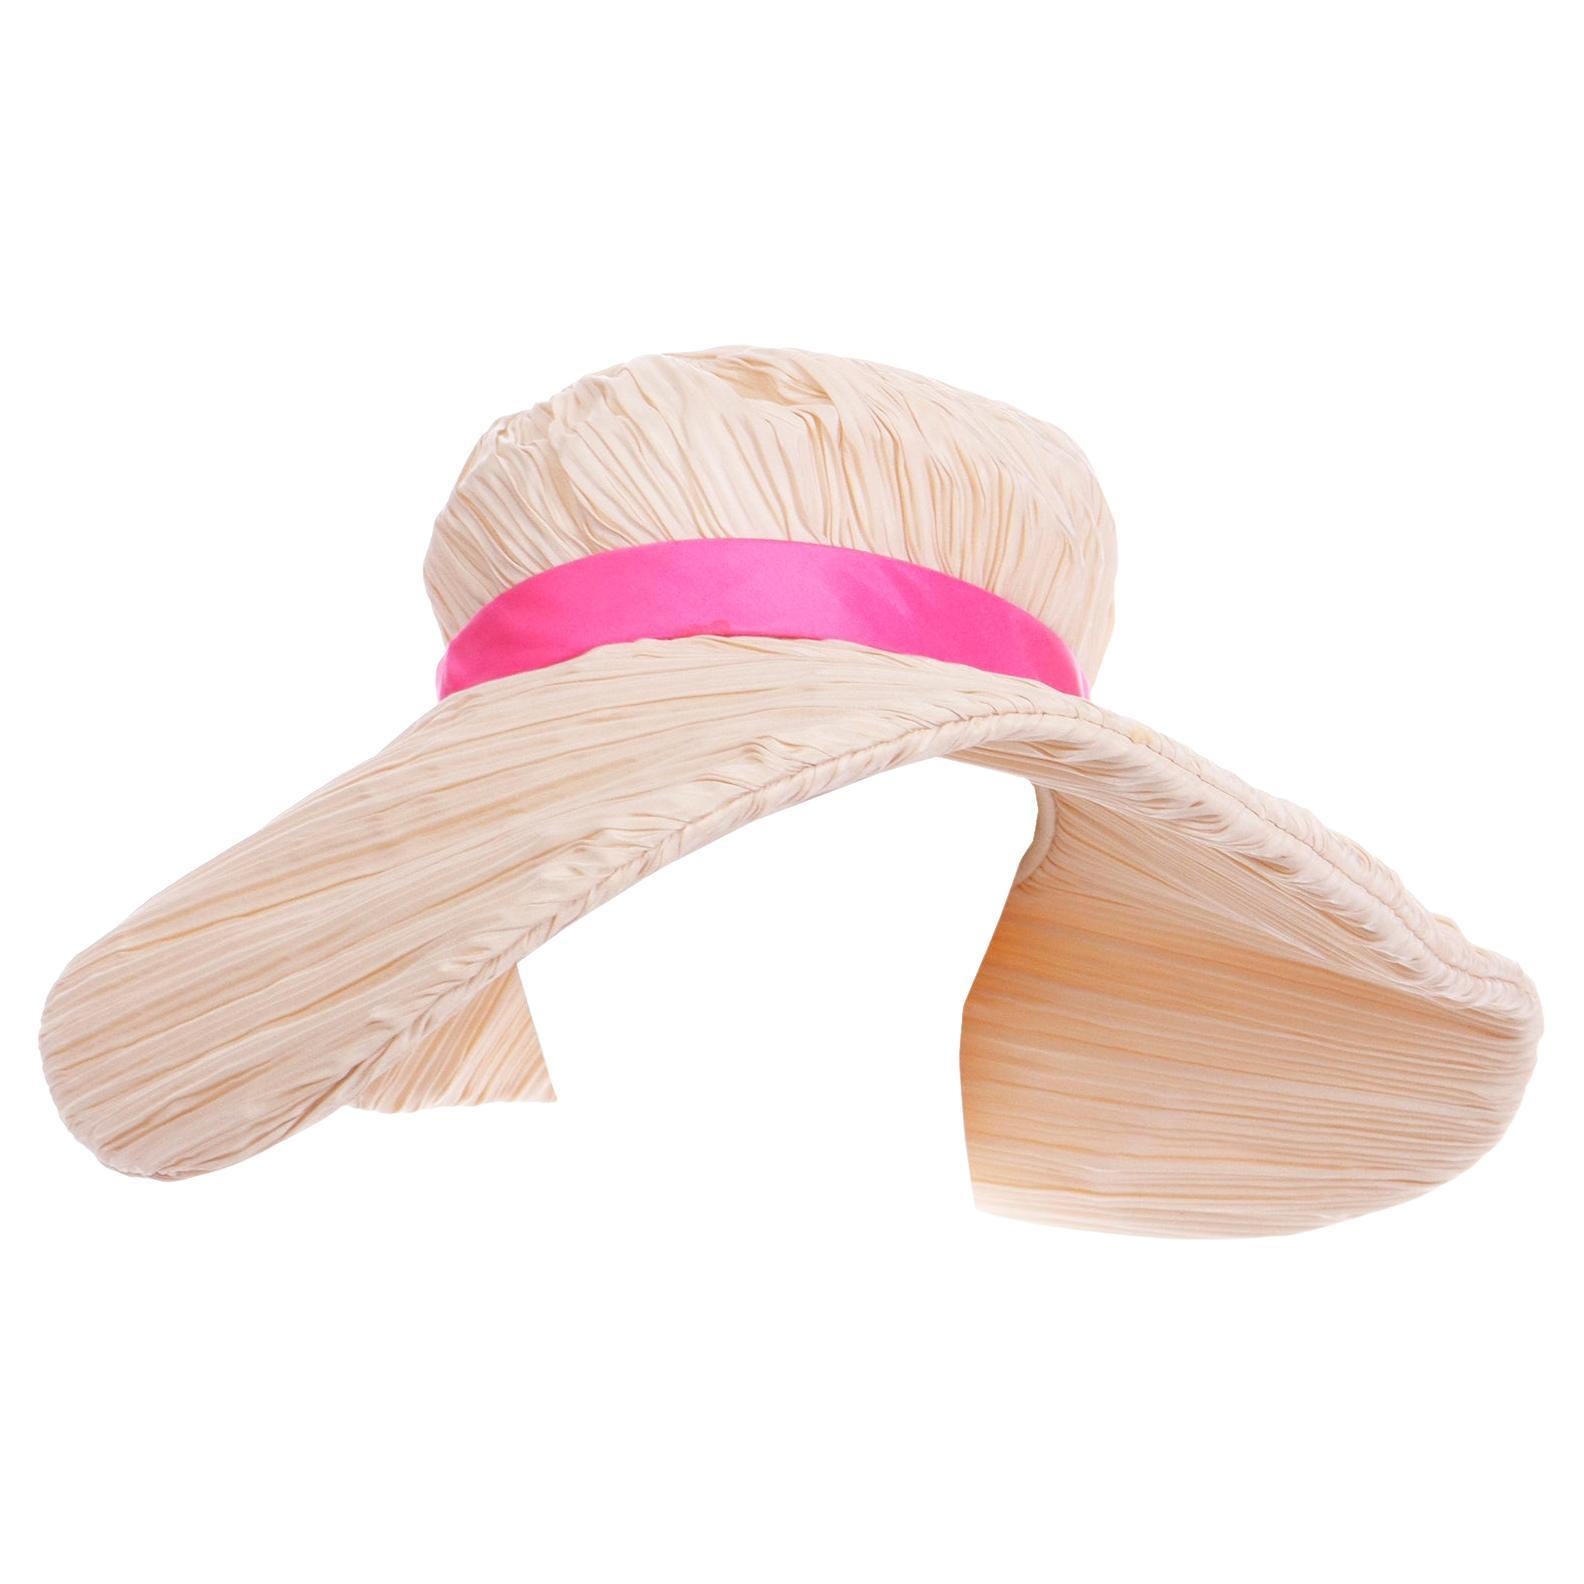 Mr John Vintage Pleated Cream Floppy Hat With Hot Pink Silk Band Ribbon